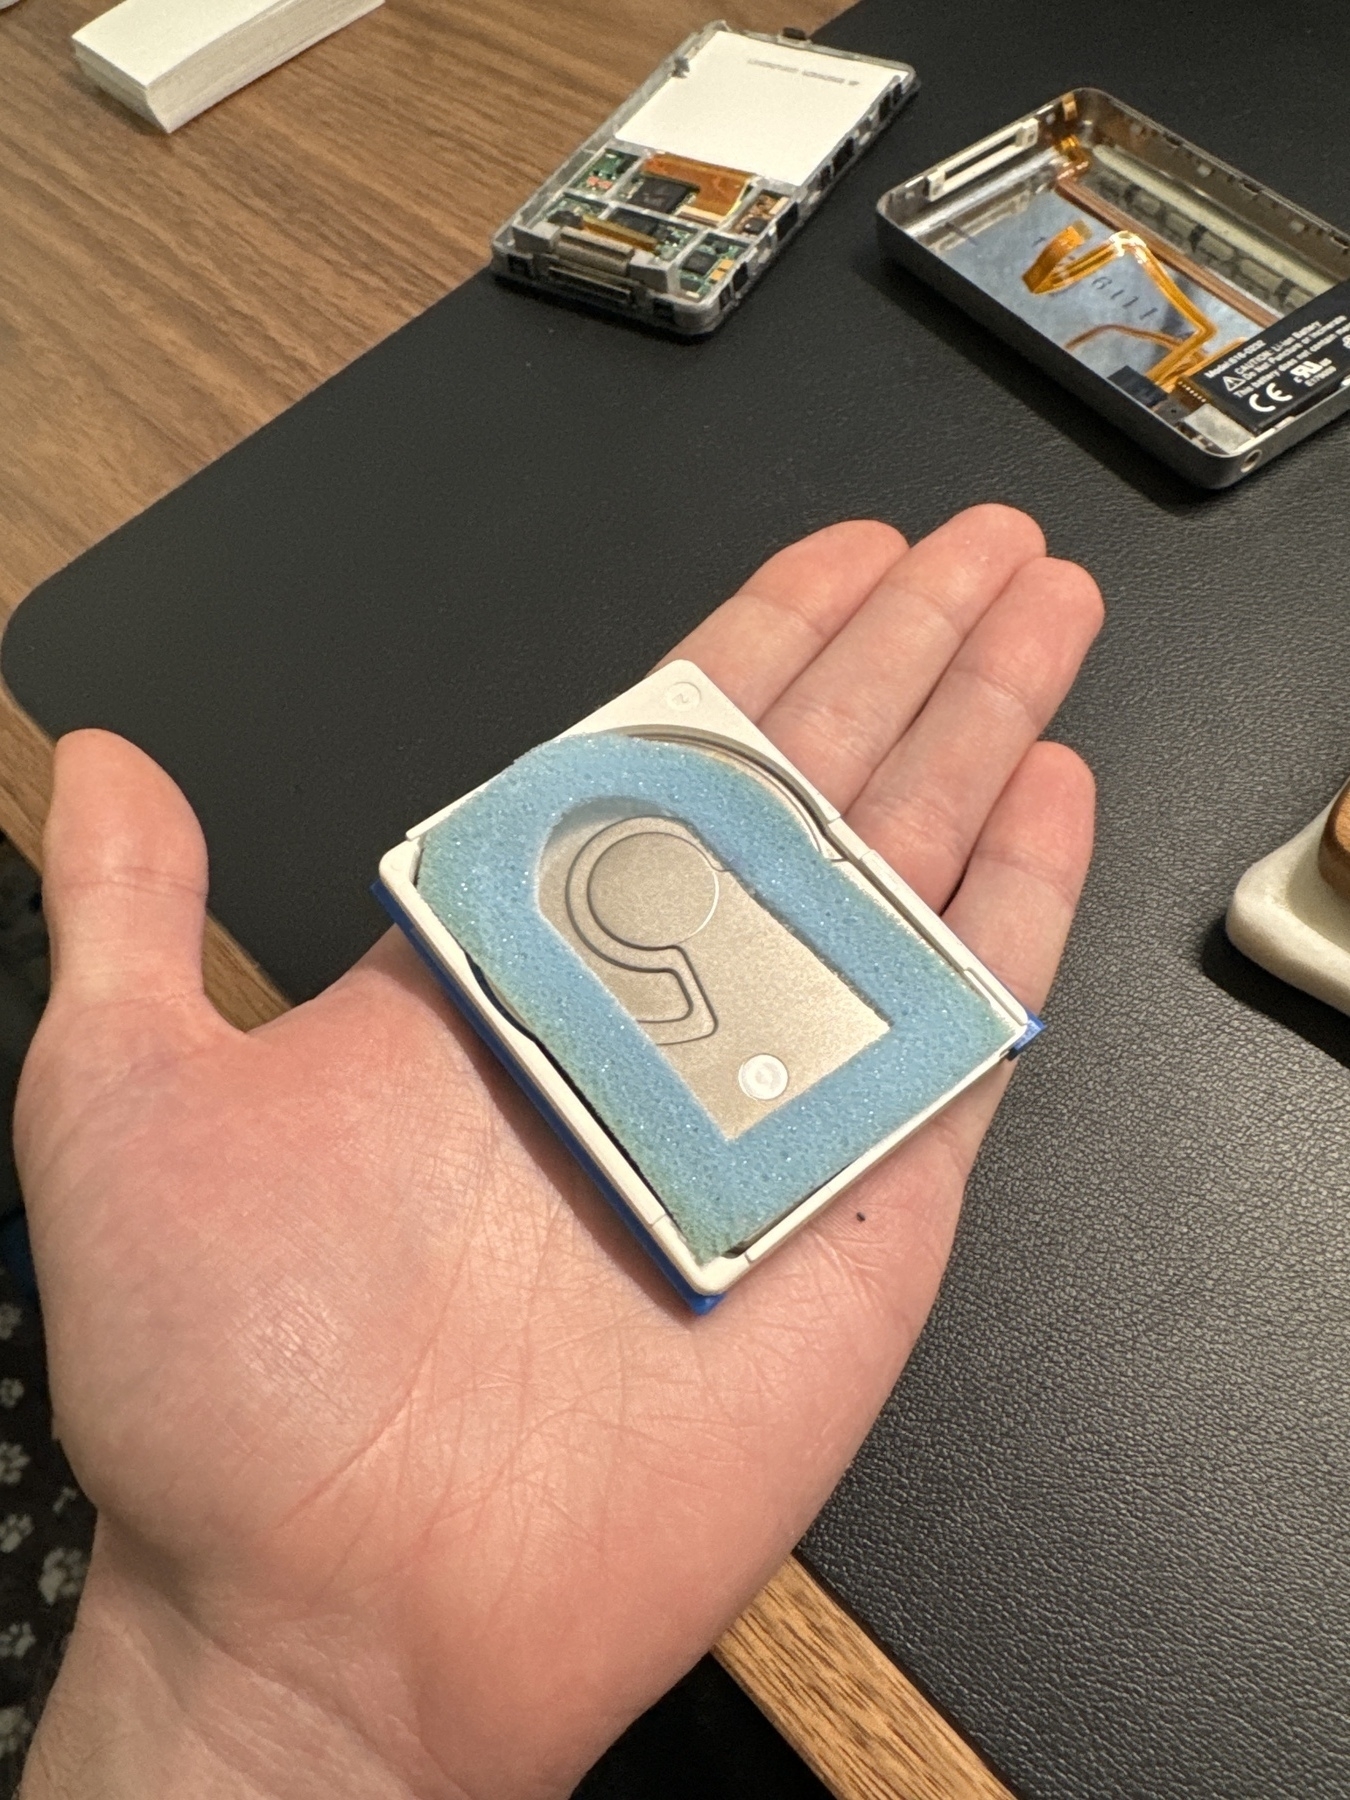 A photo of an 80 gb hard drive small enough to fit in the (admittedly large) palm of my hand. A partially disassembled 5.5th generation iPod sits on the desk in the background. 